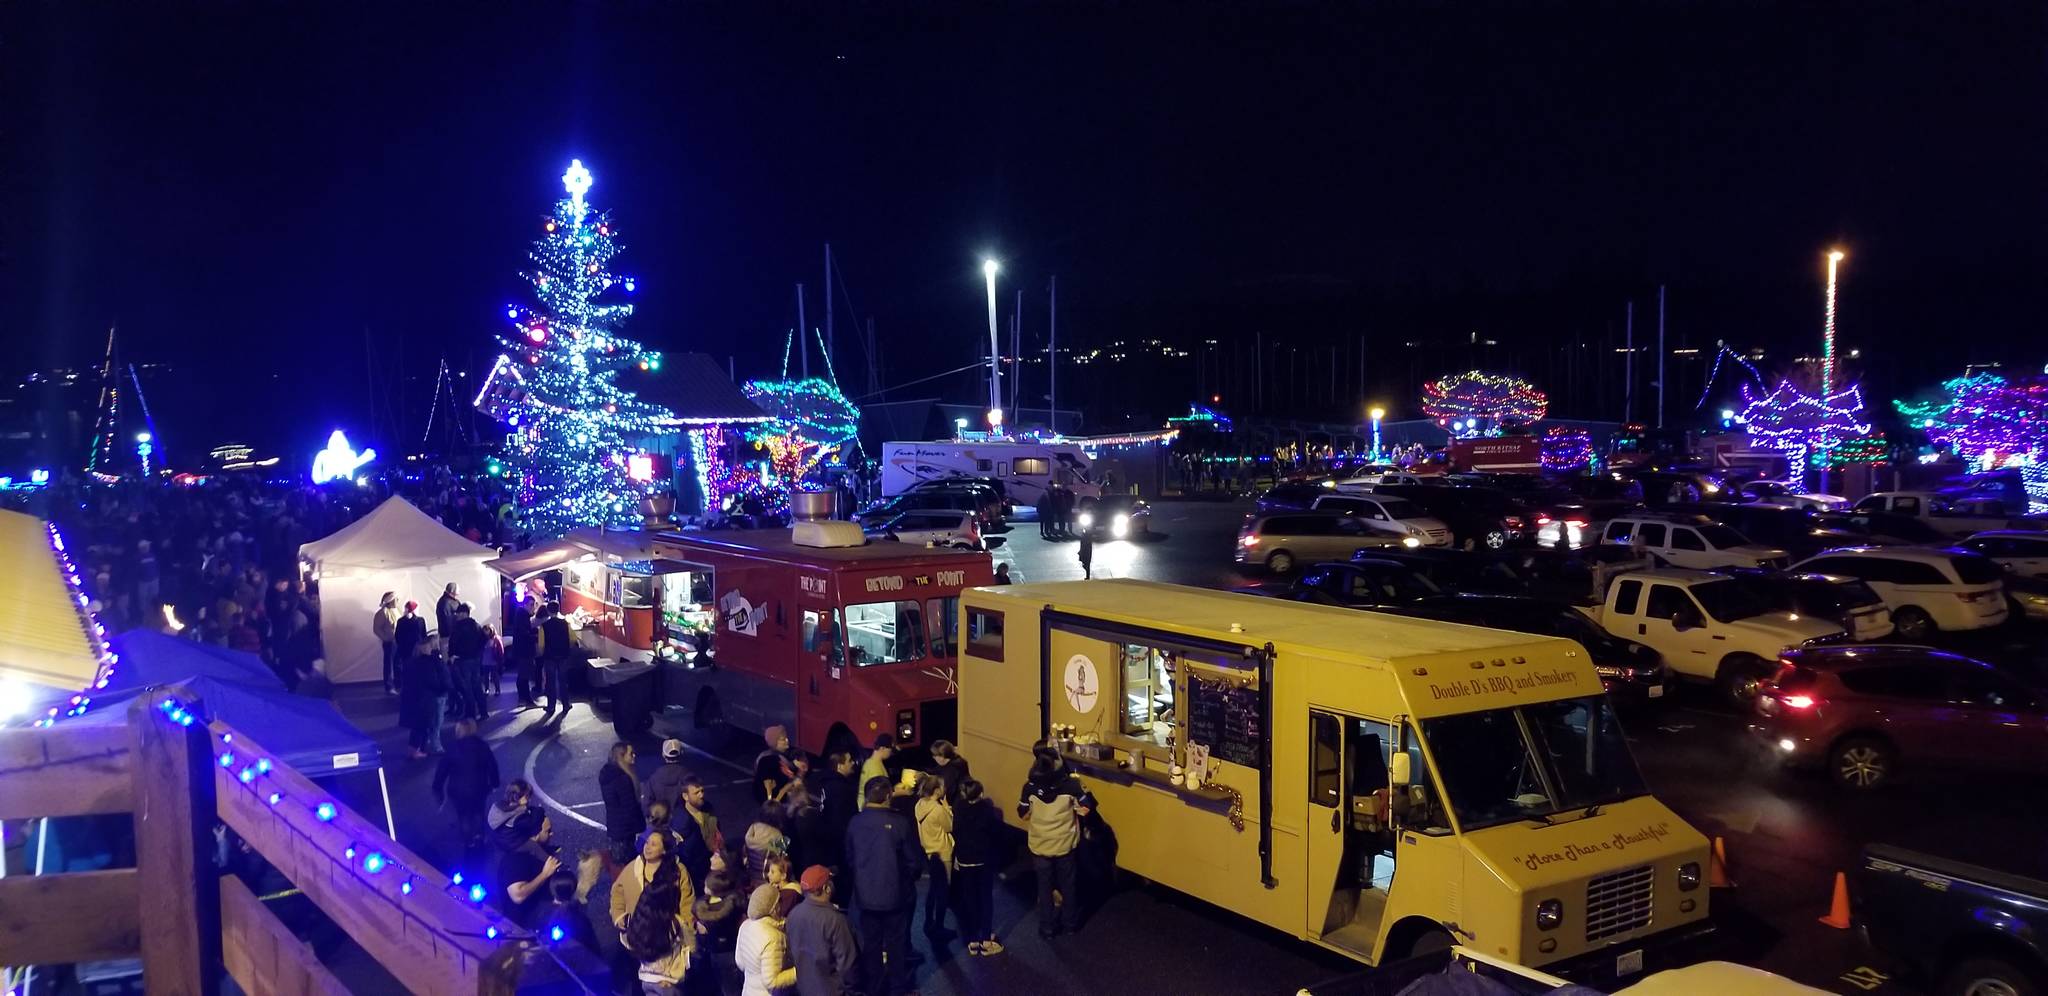 Kingston shines bright on the waterfront